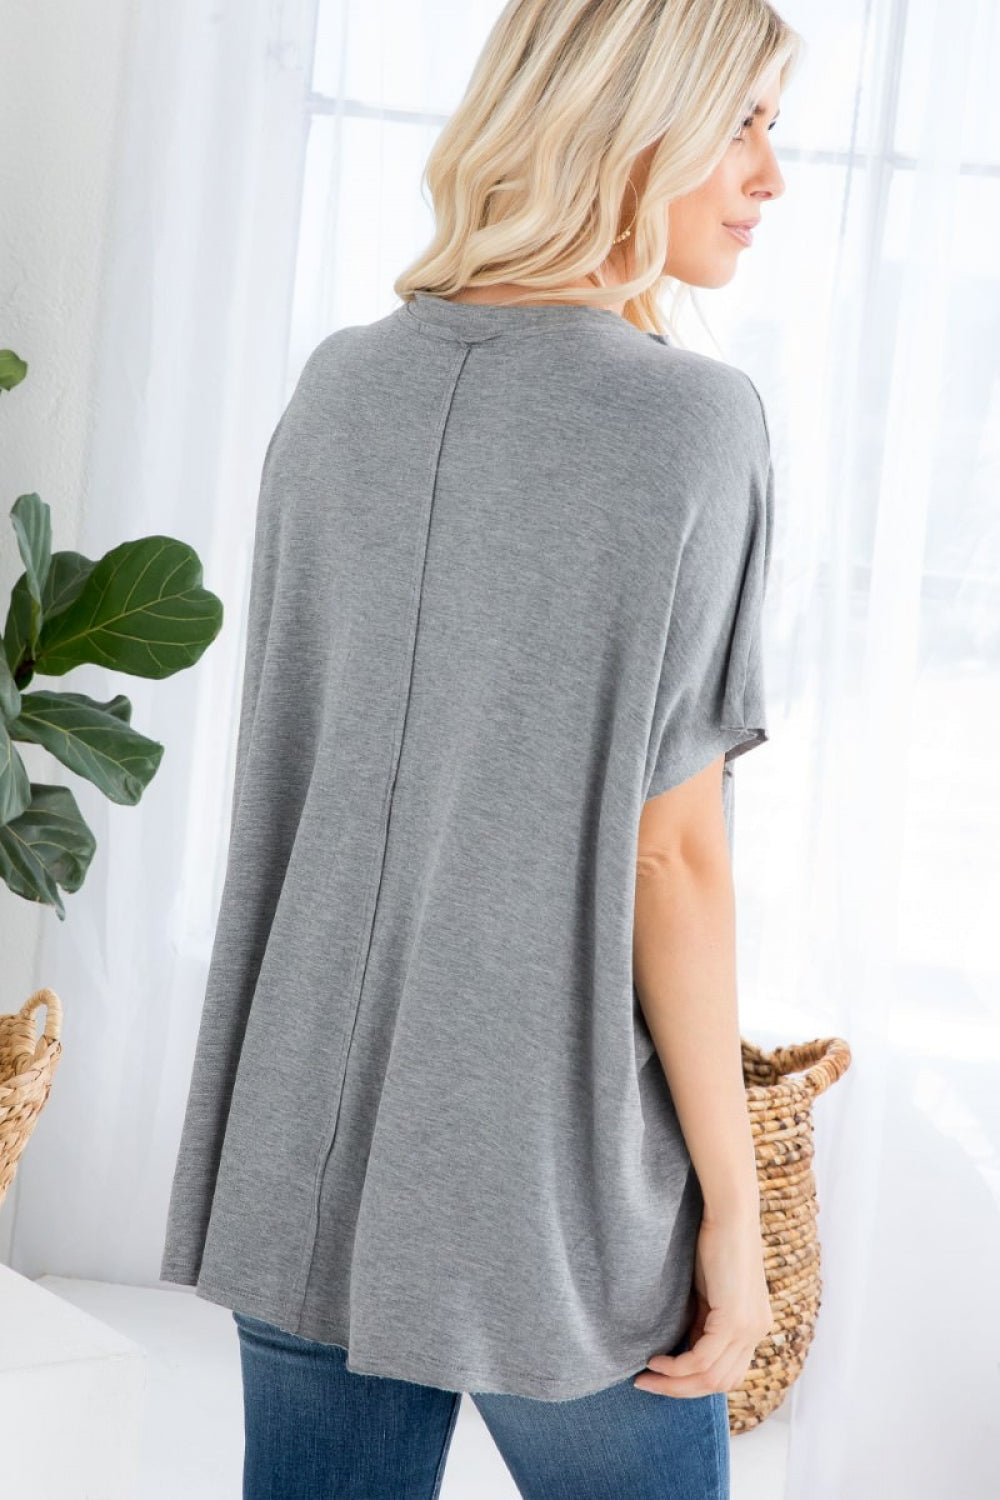 Round neck, short sleeves, loose fit knit top